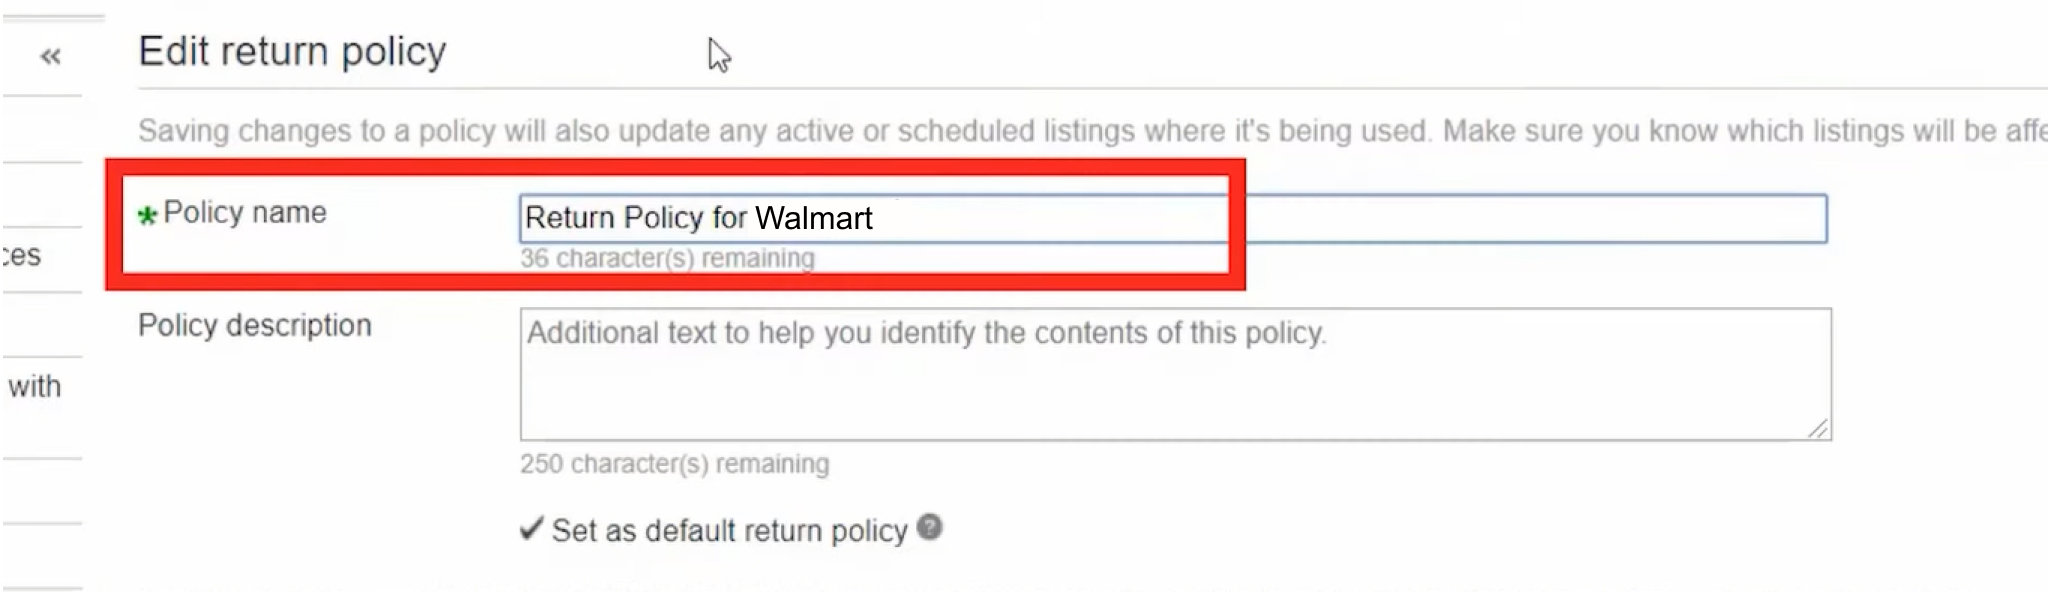 Returns policy for walmart dropshipping